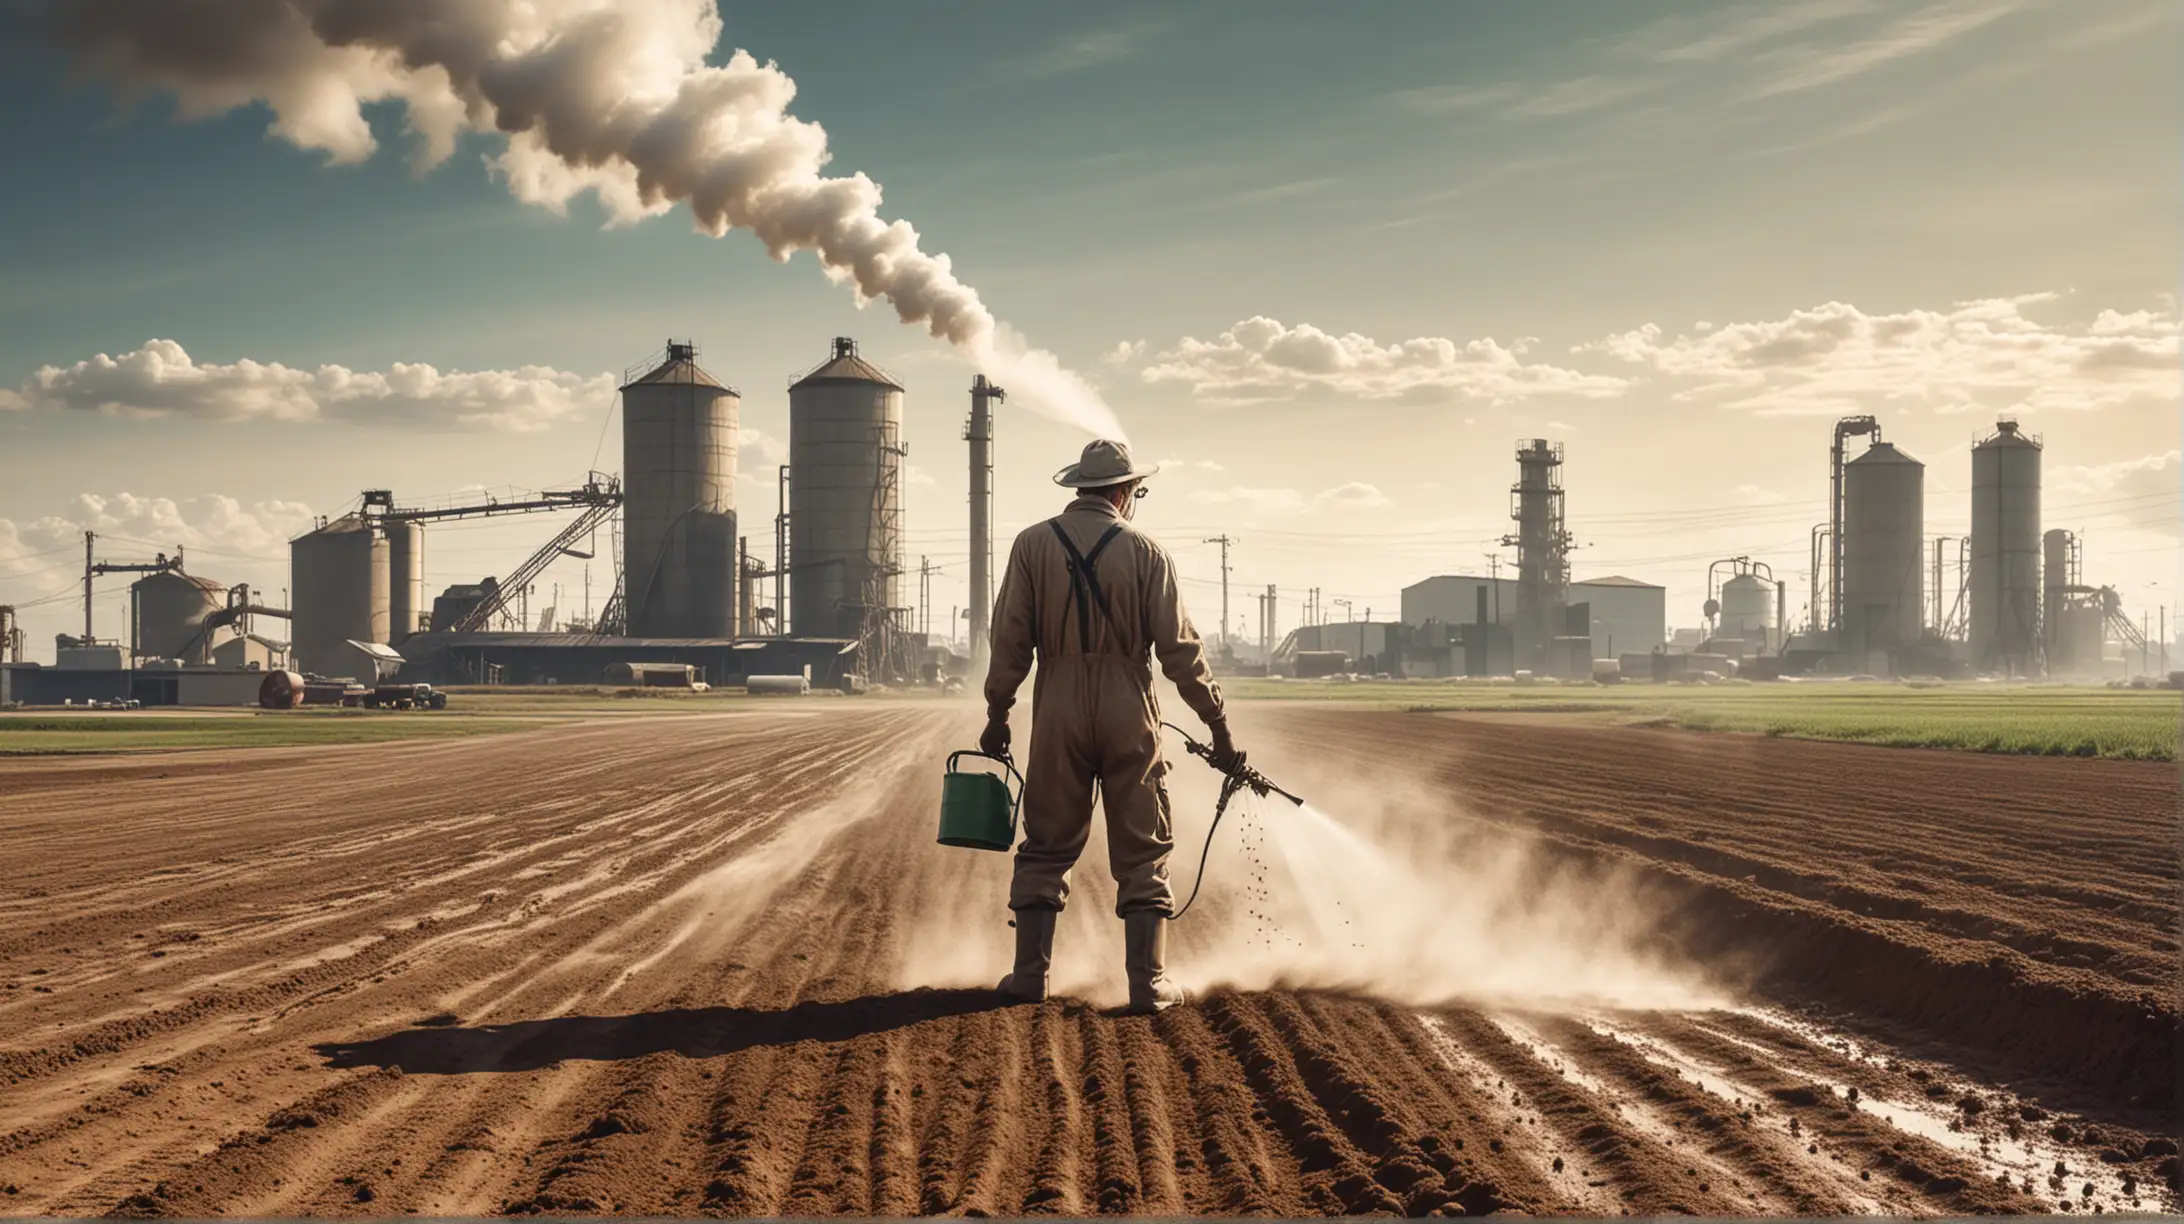 surrealist artwork of farmer spraying pesticides. soil is not healthy. industrial factory in background